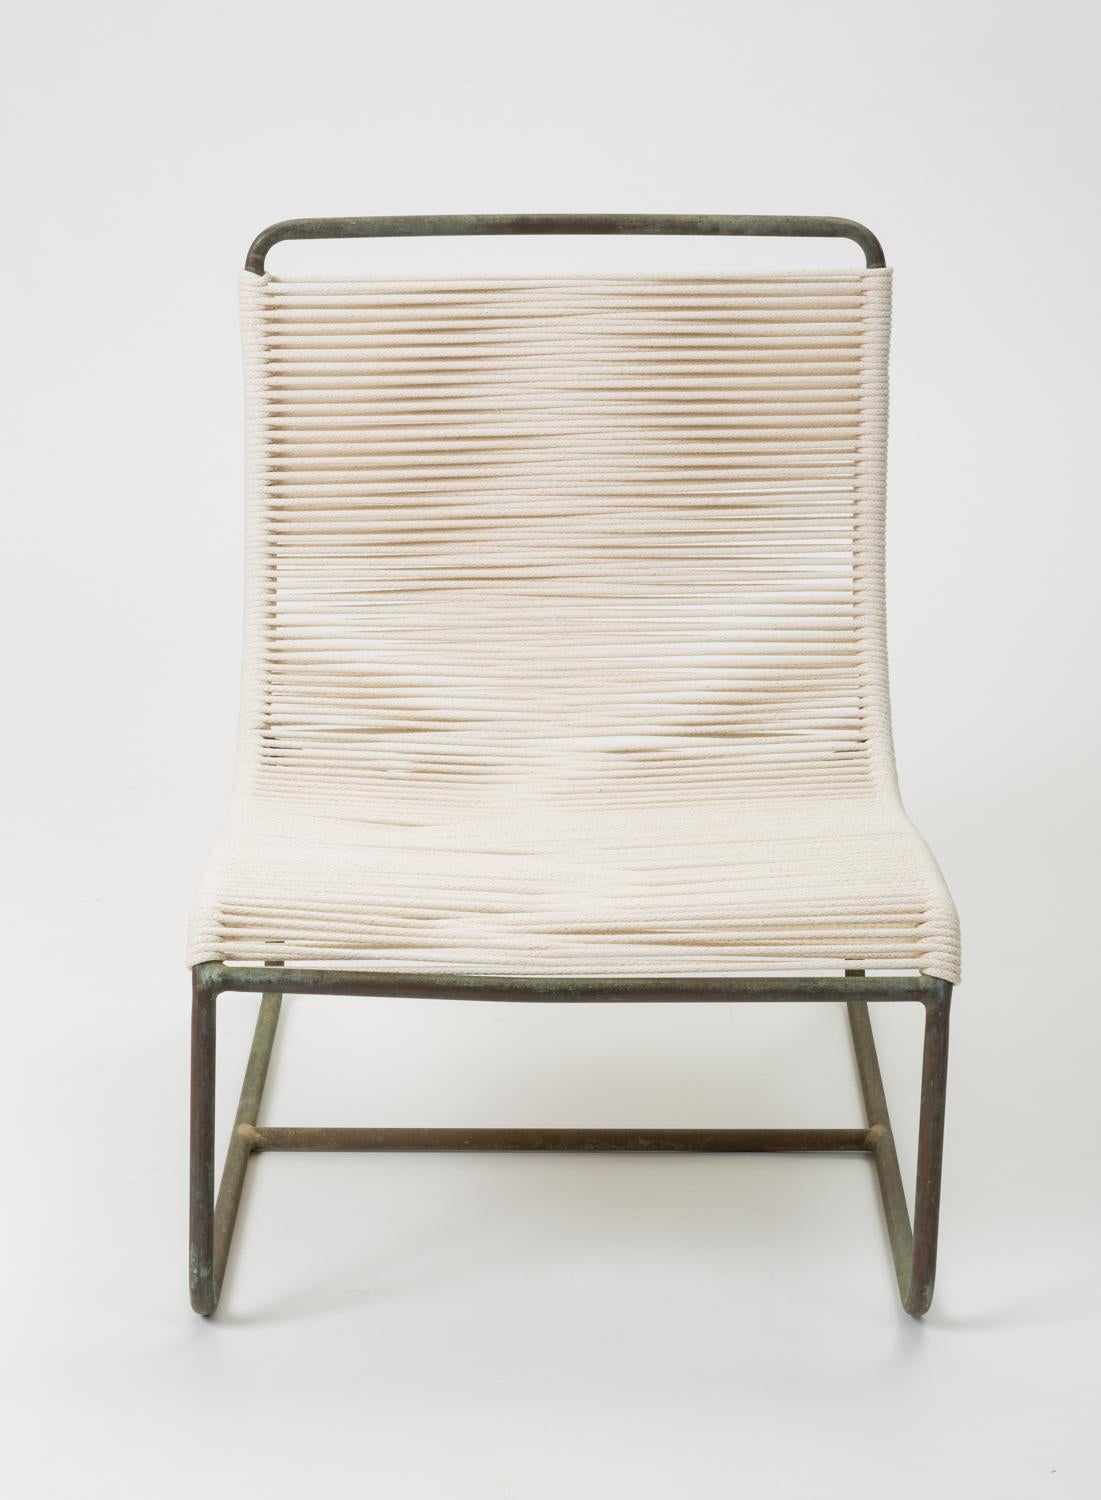 A pair of low lounge chairs, known as the “Sleigh Chair” by Walter Lamb for Brown Jordan. A continuous length of tubular bronze serves as the frame of a scooped seat, bends beneath the chair to form two runners, and terminates in two delicately